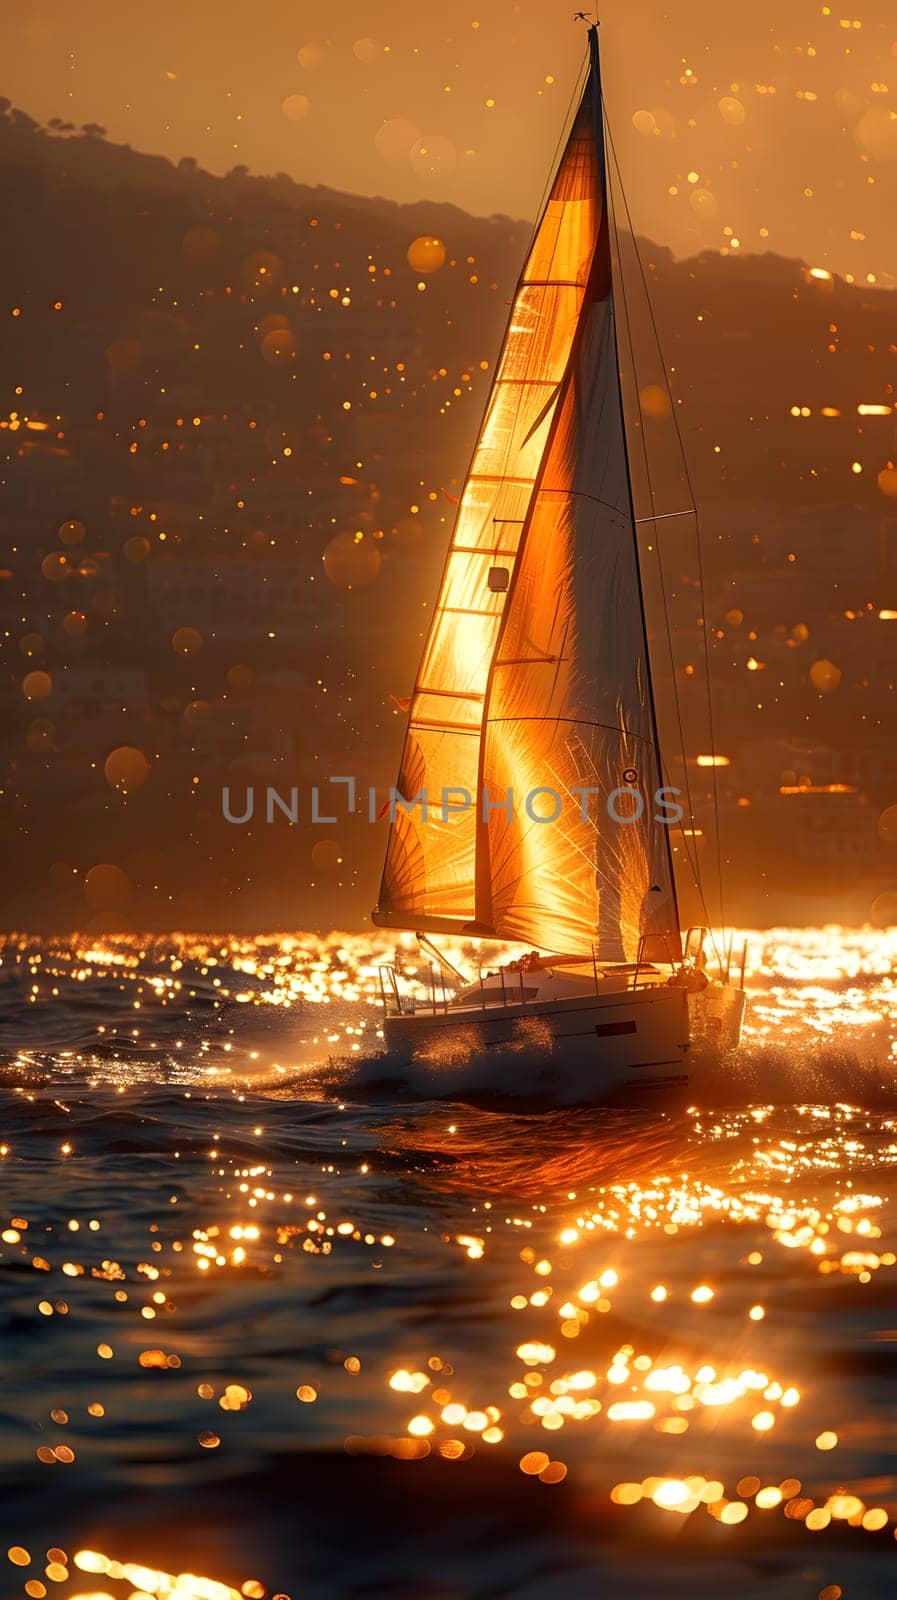 A wooden sailboat glides gracefully on the liquid surface of the water as the sun sets on the horizon, creating a beautiful natural landscape with the glowing astronomical object above